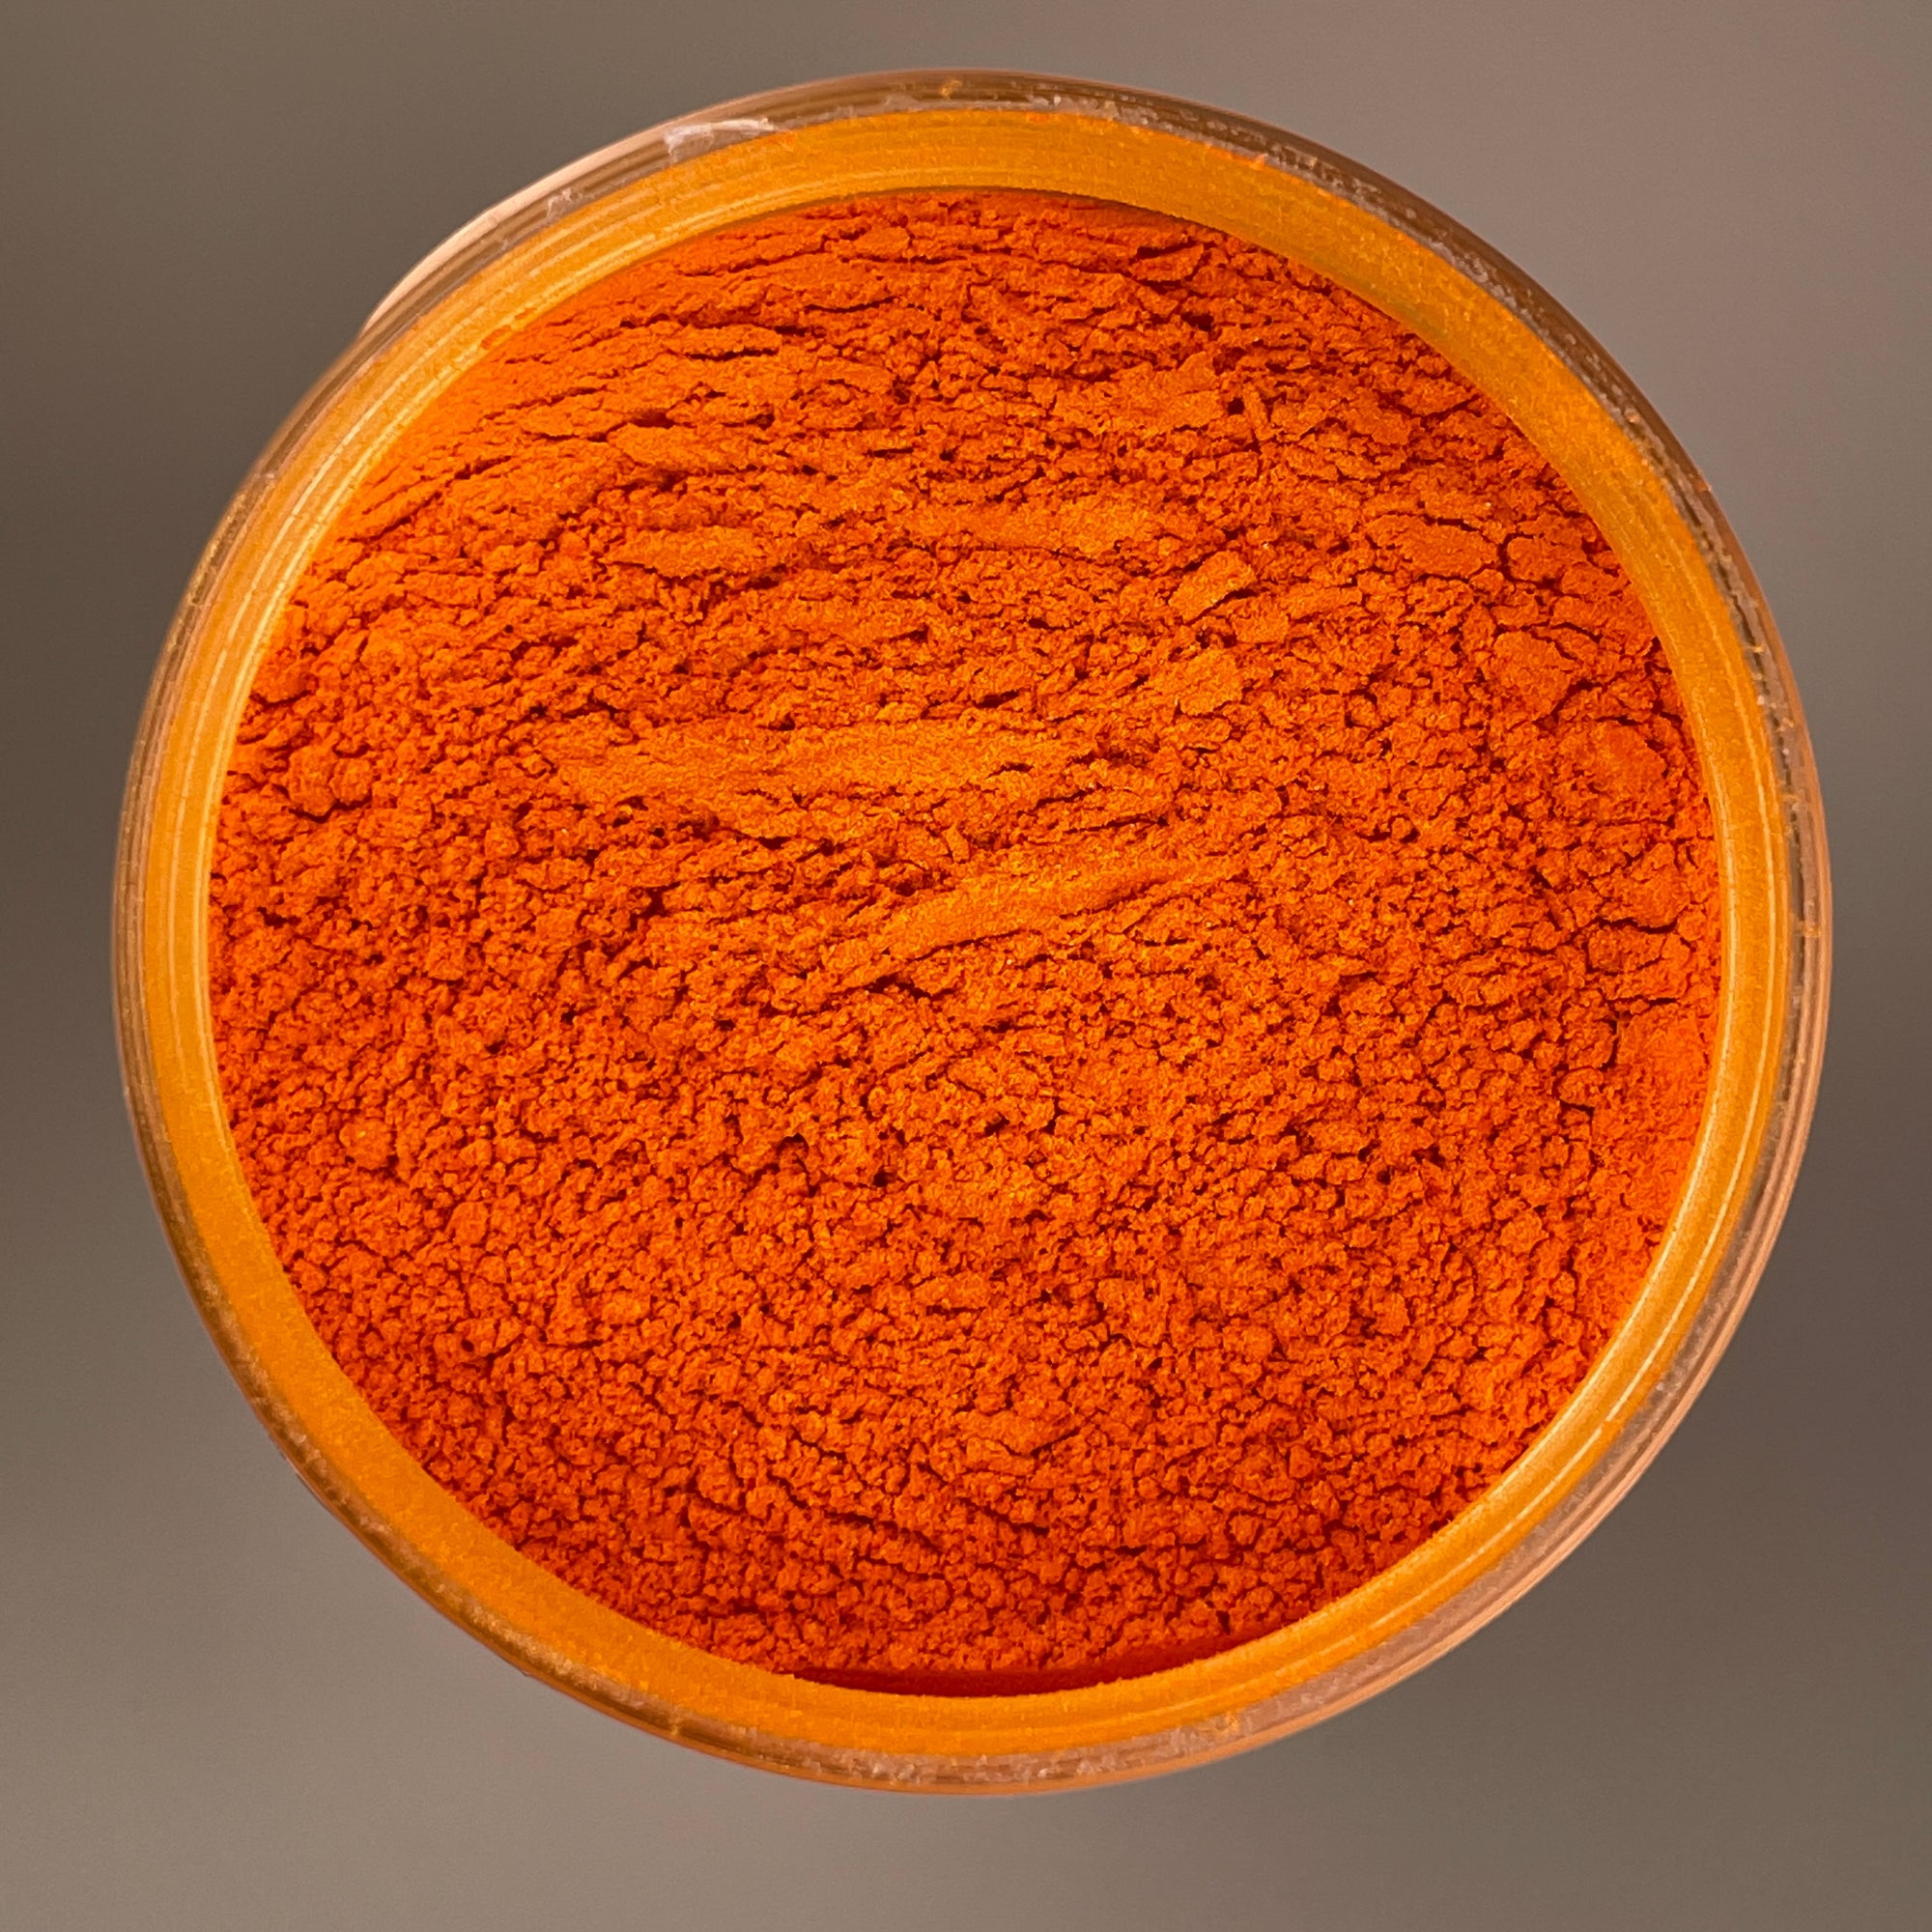 powder pigment for diy crafts to give a vibrant but soft light orange colour to your projects